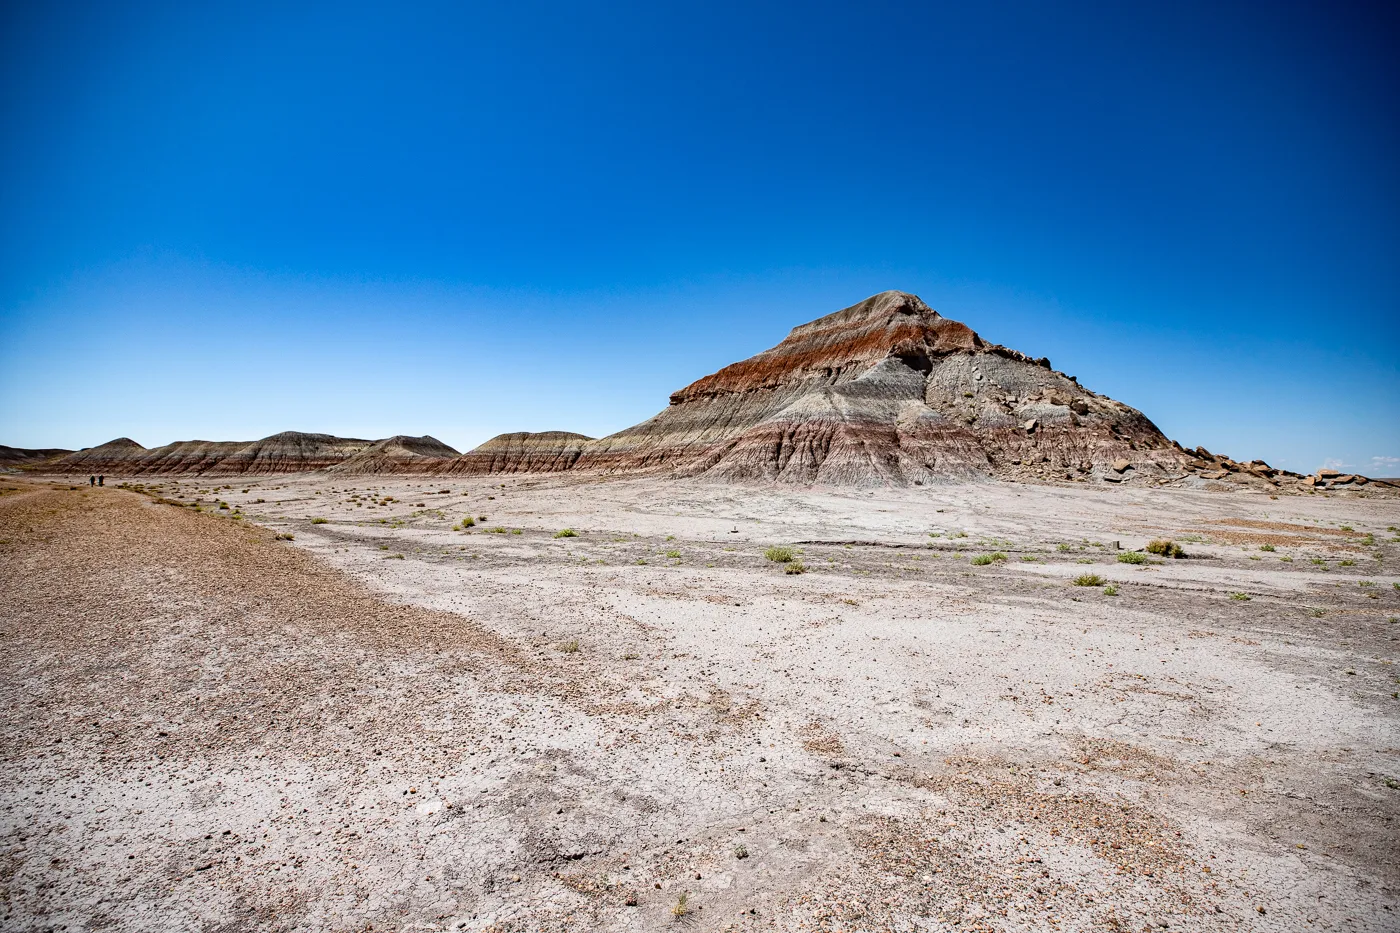 Petrified Forest National Park in Arizona - Blue Mesa